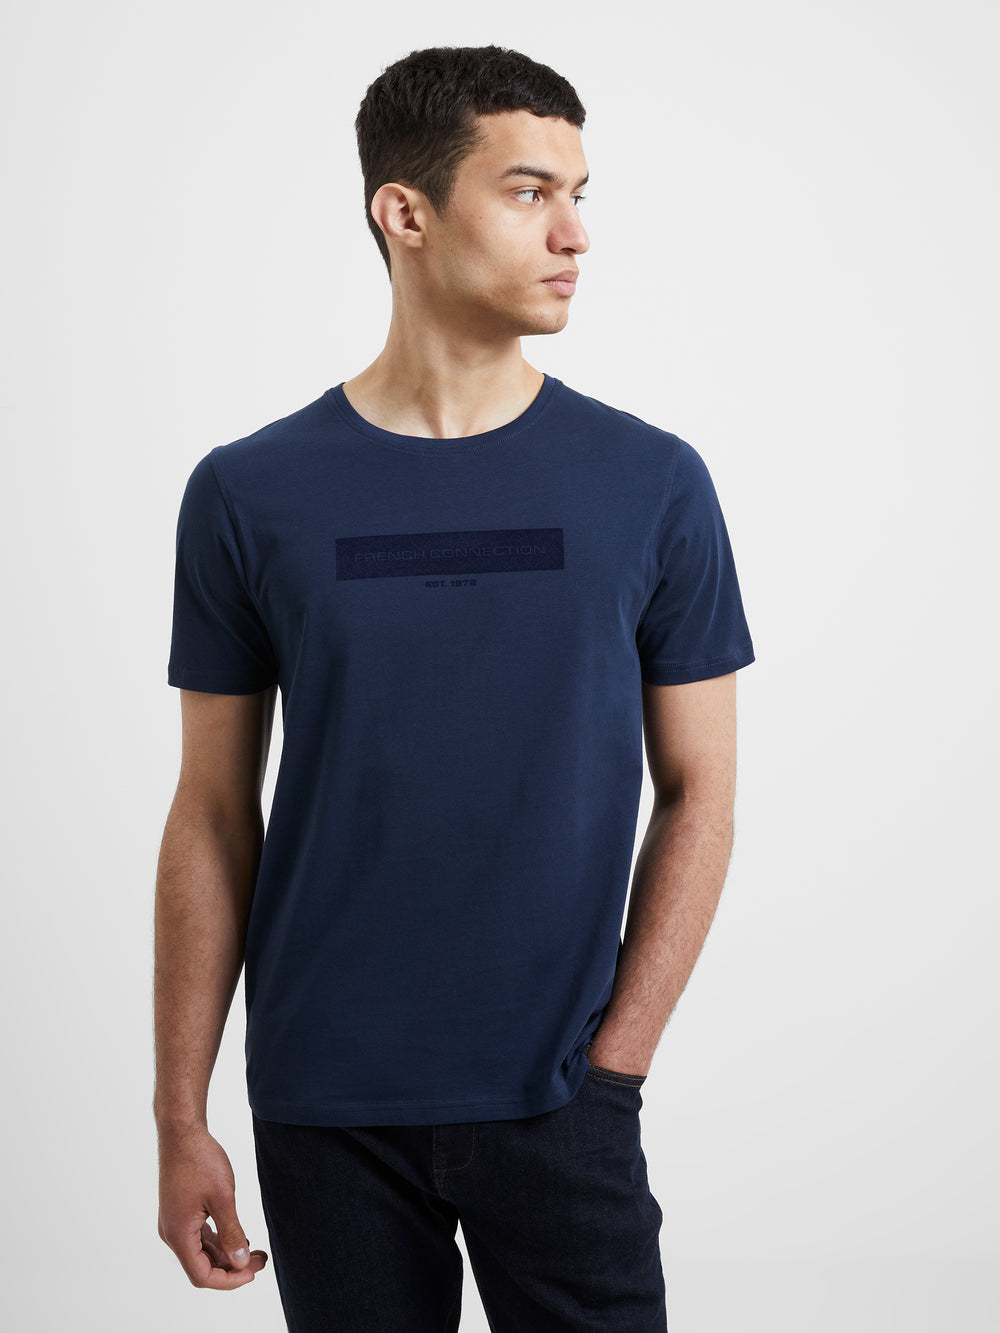 Blockdown T-Shirt Blue Night | French Connection UK